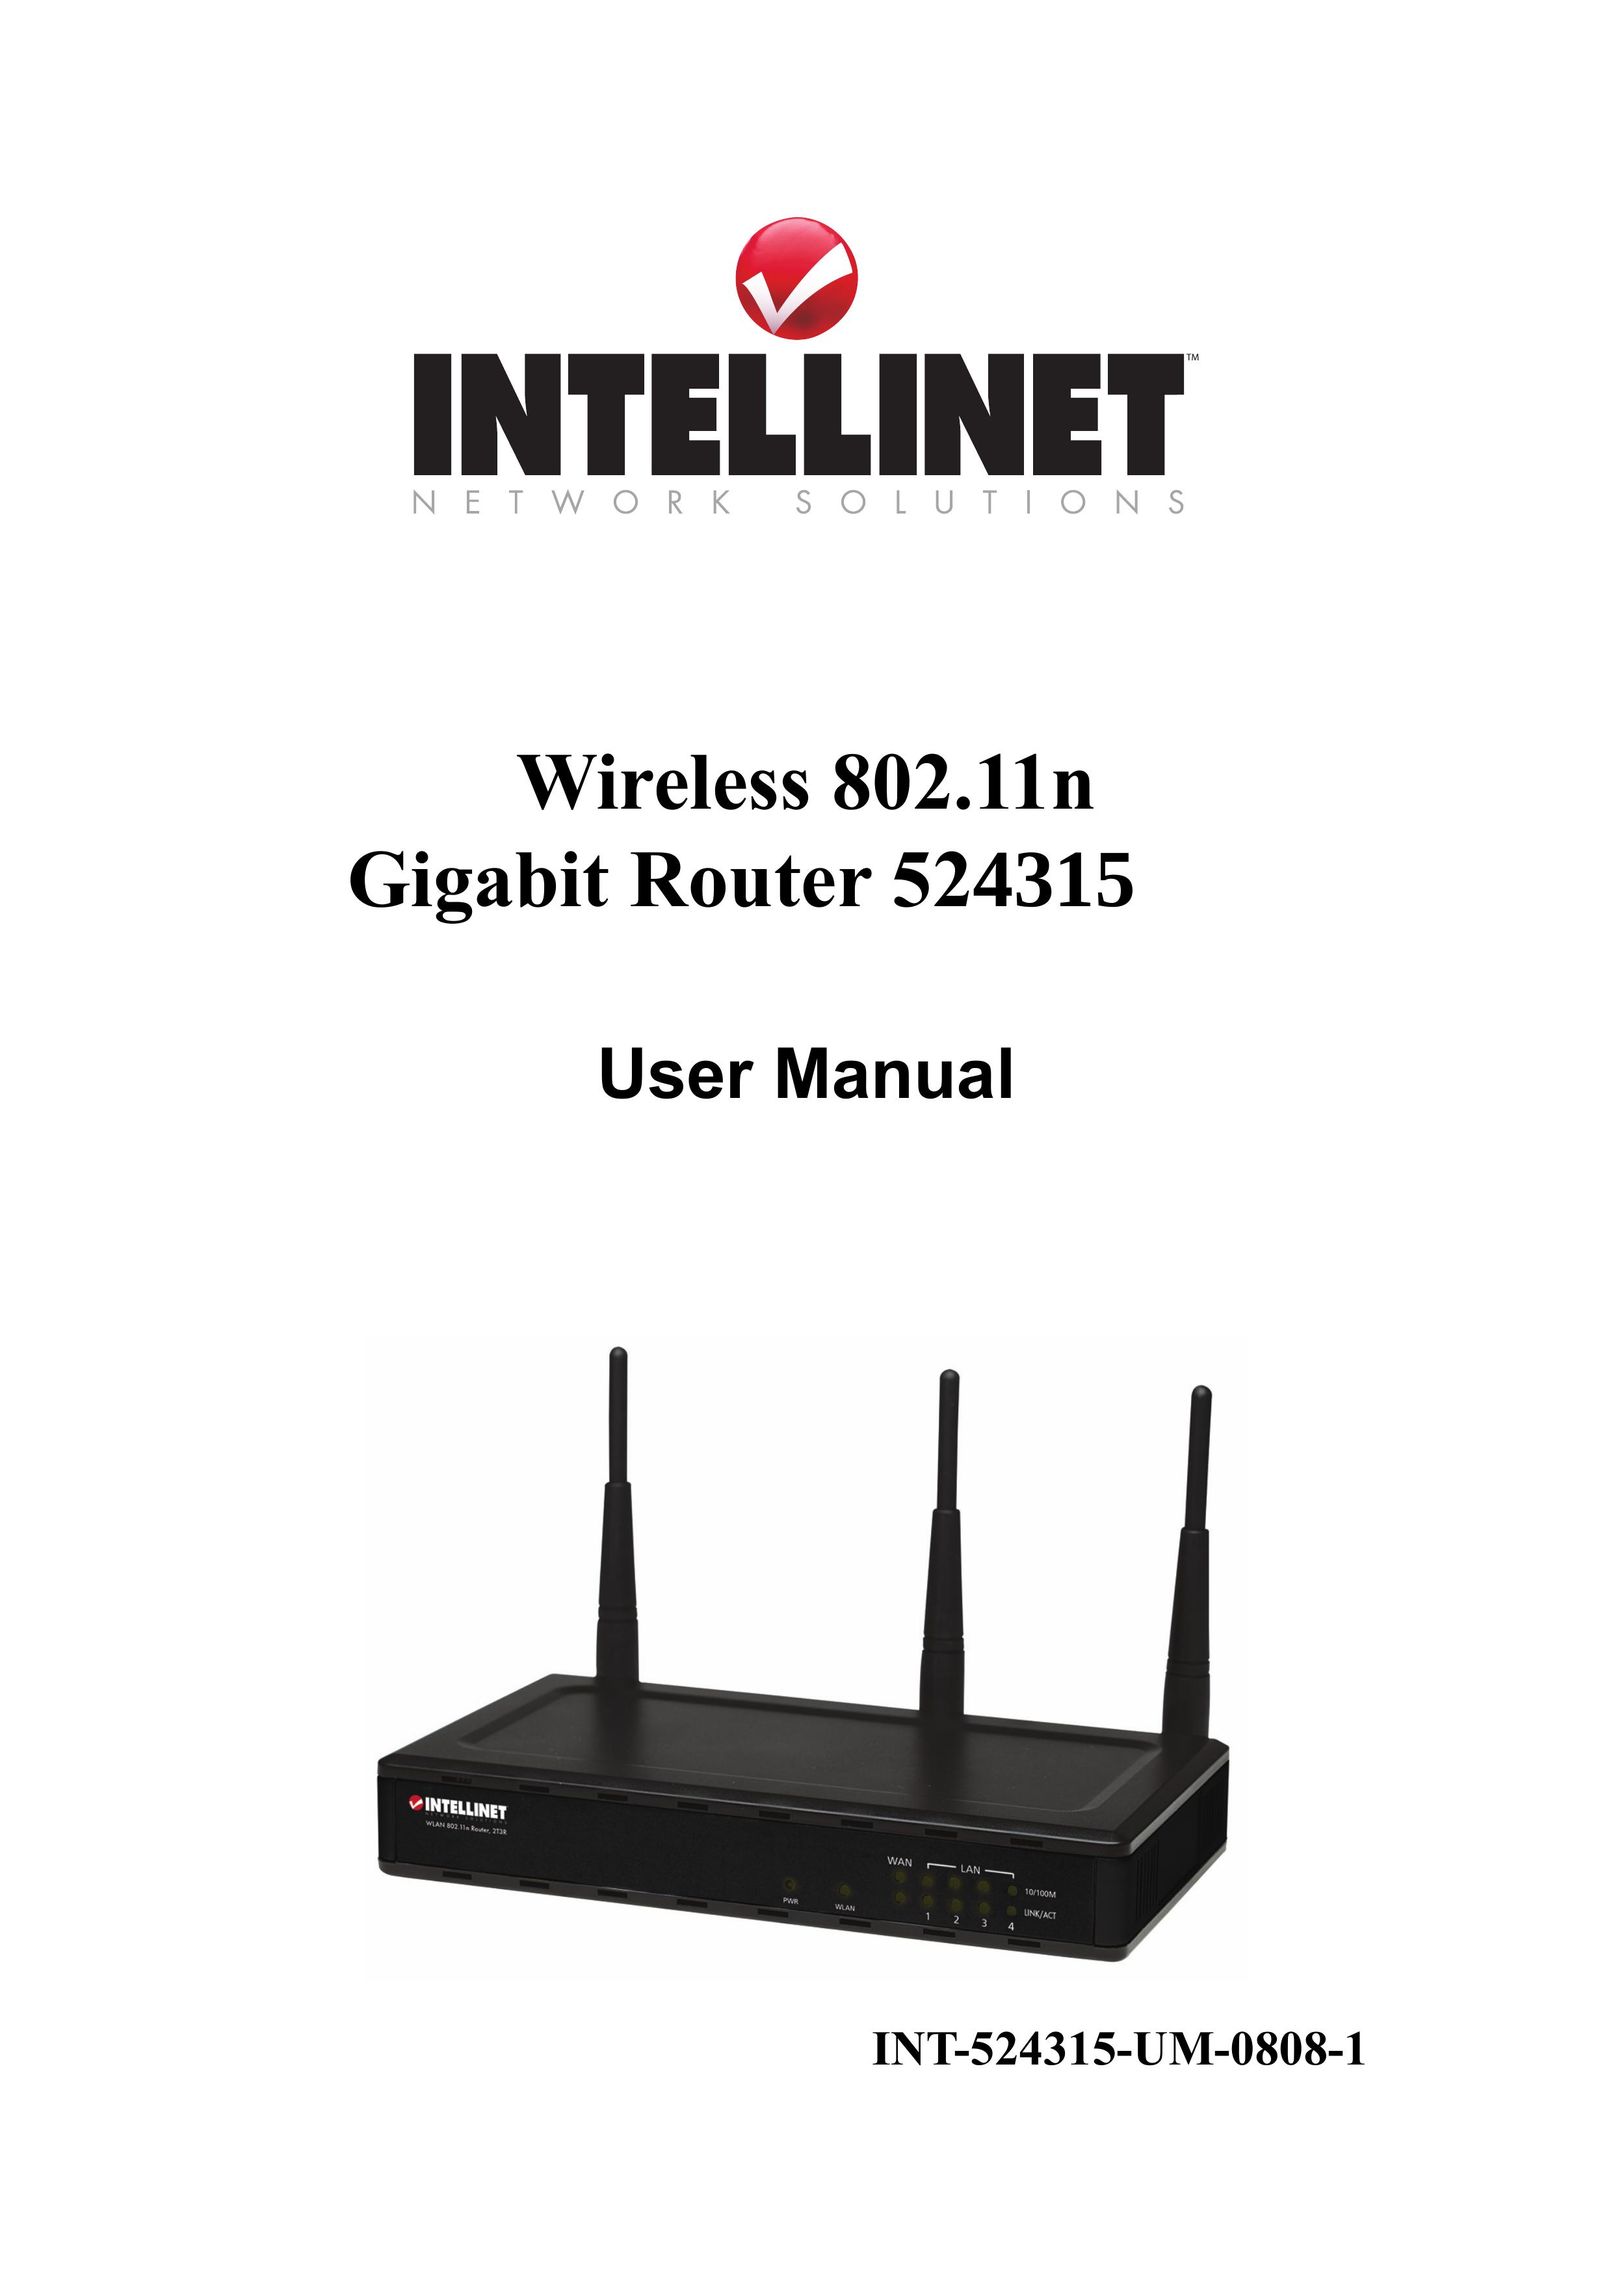 Intellinet Network Solutions INT-524315-UM-0808-1 Network Router User Manual